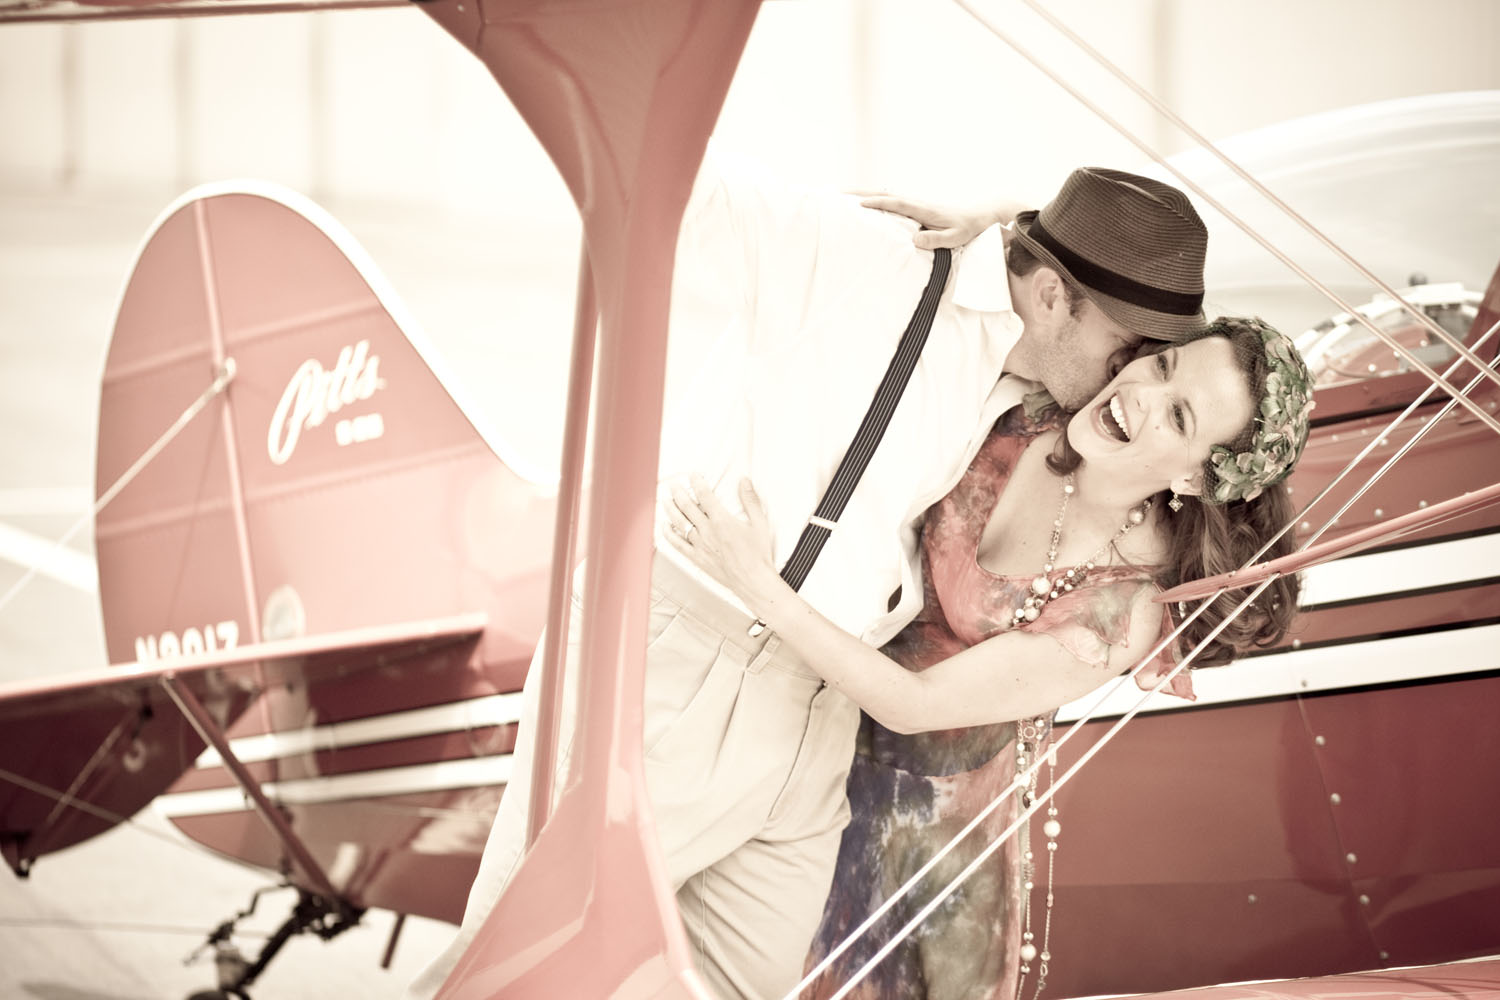 This was taken during a 1930's-era aviation-themed photo shoot at John Wayne Airport with my Pitts S-2B biplane